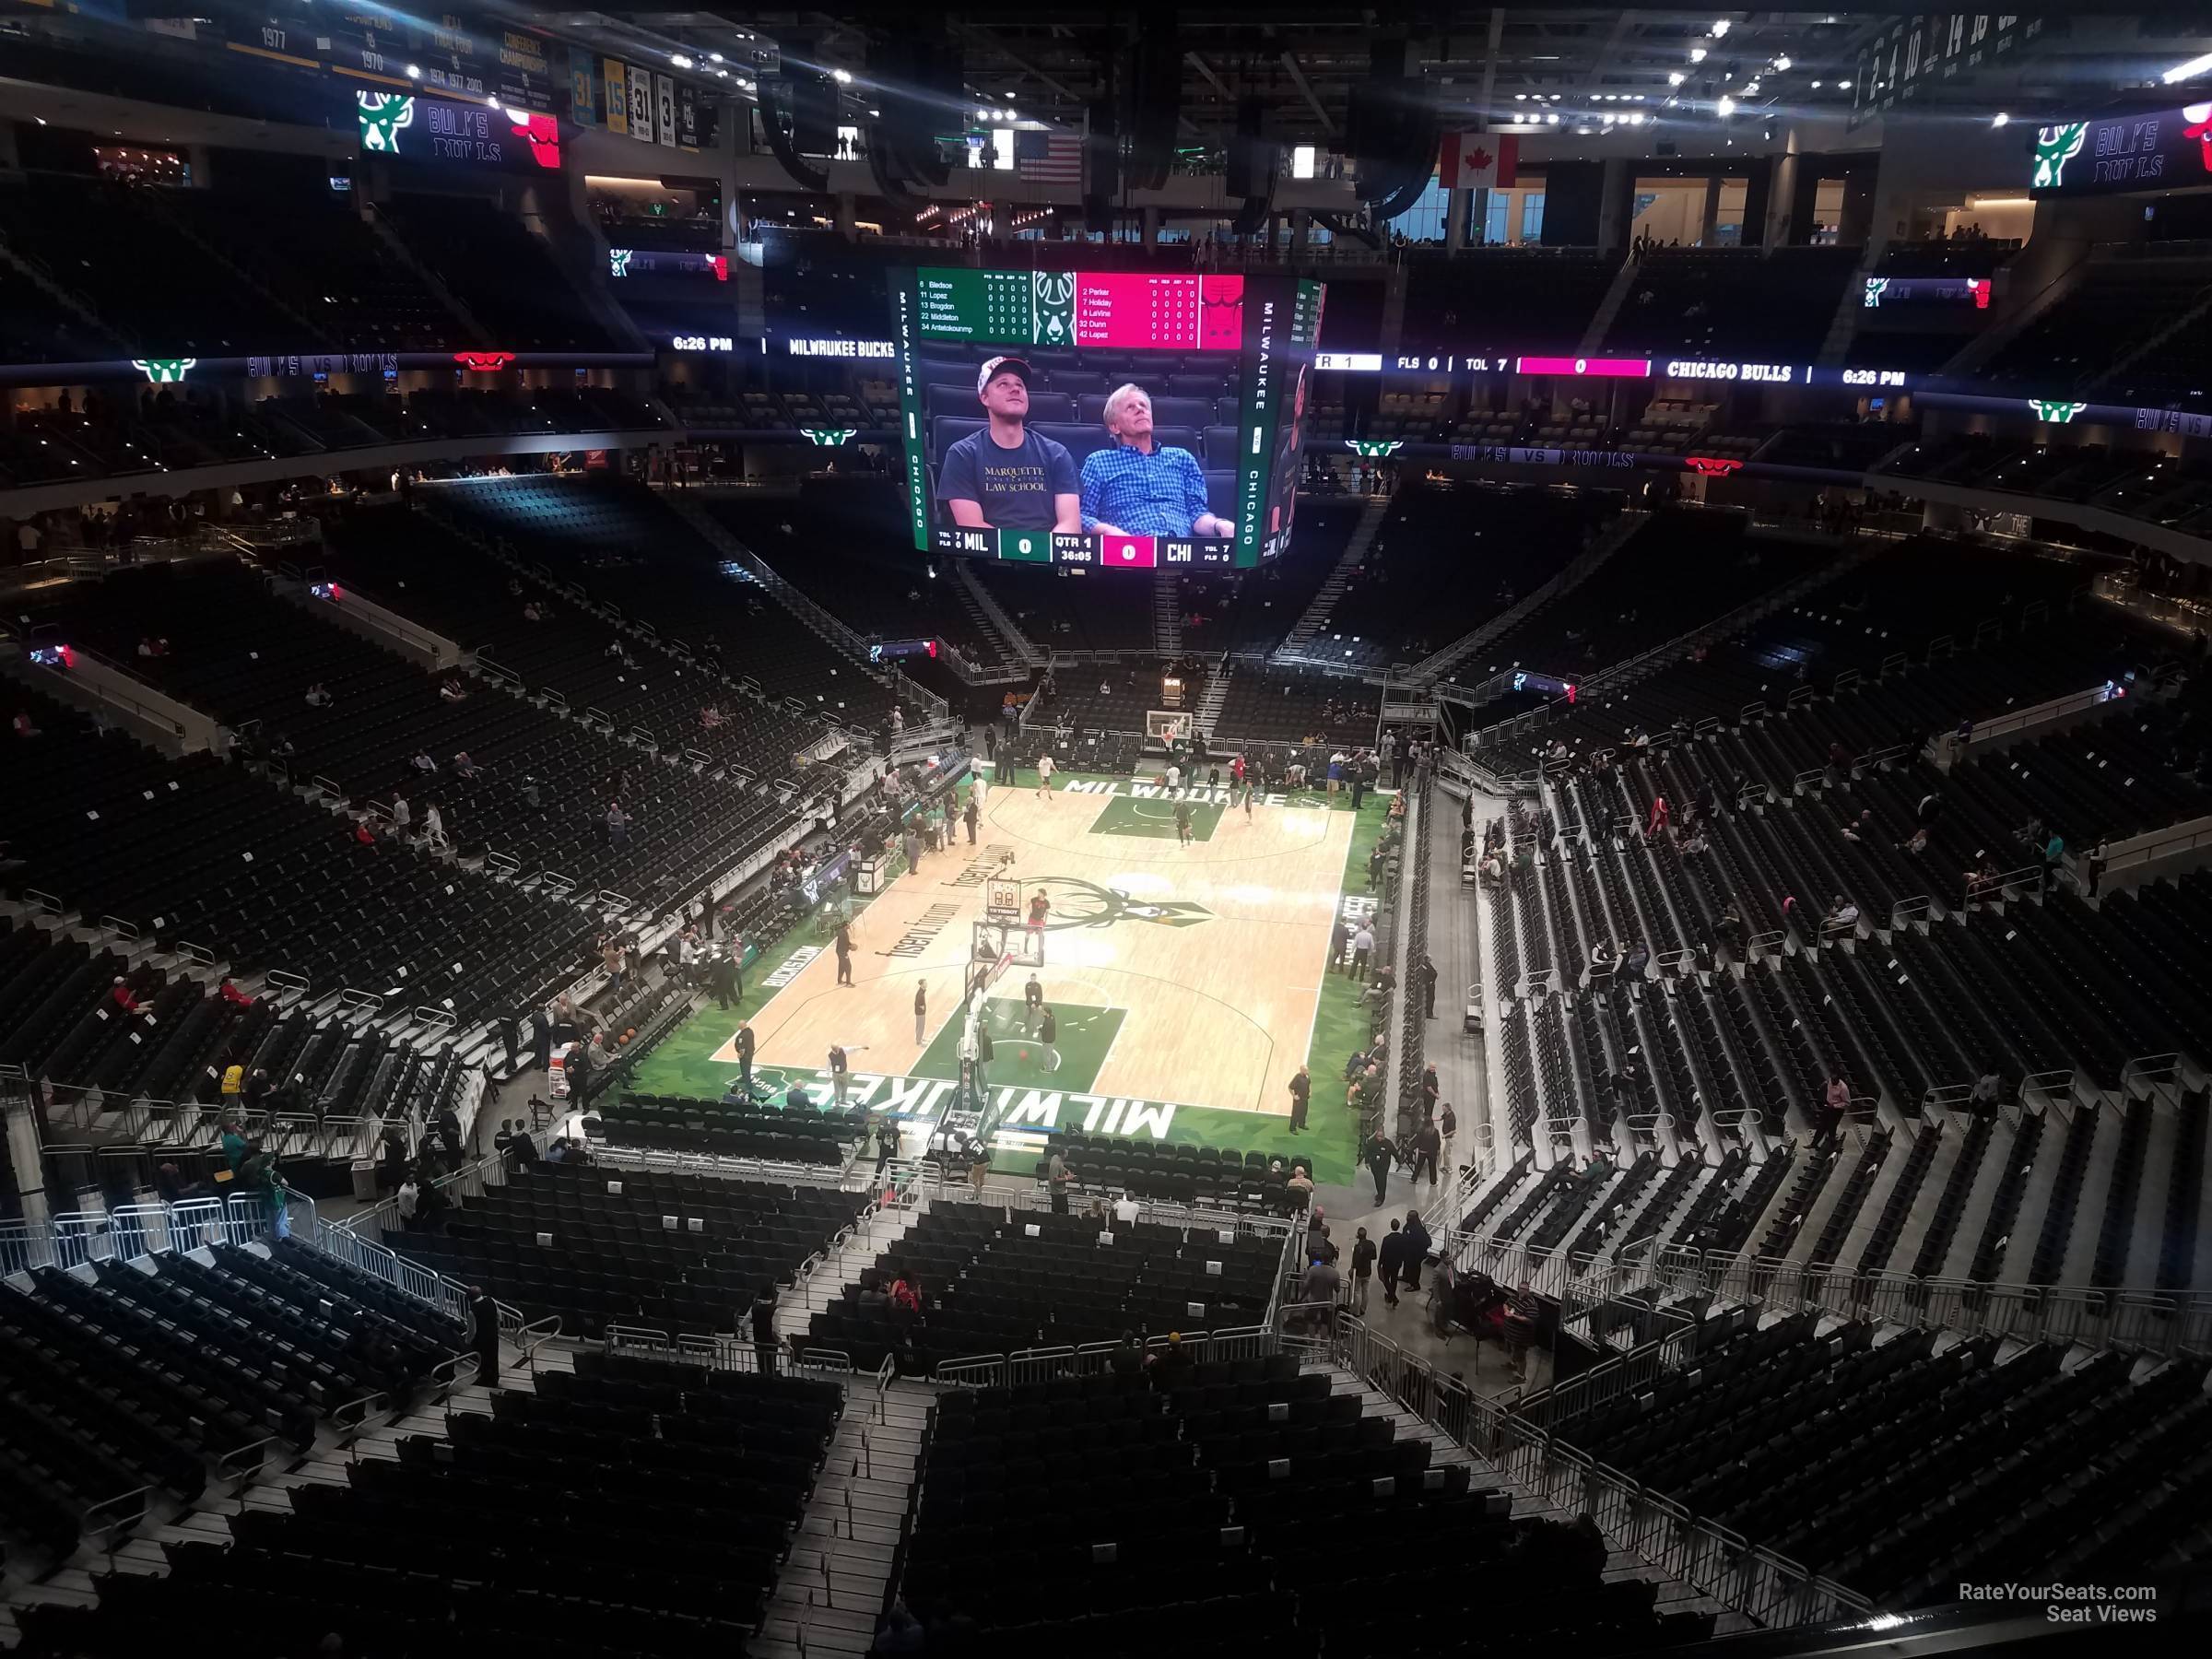 The Fiserv Forum is pretty amazing. This pic is from their